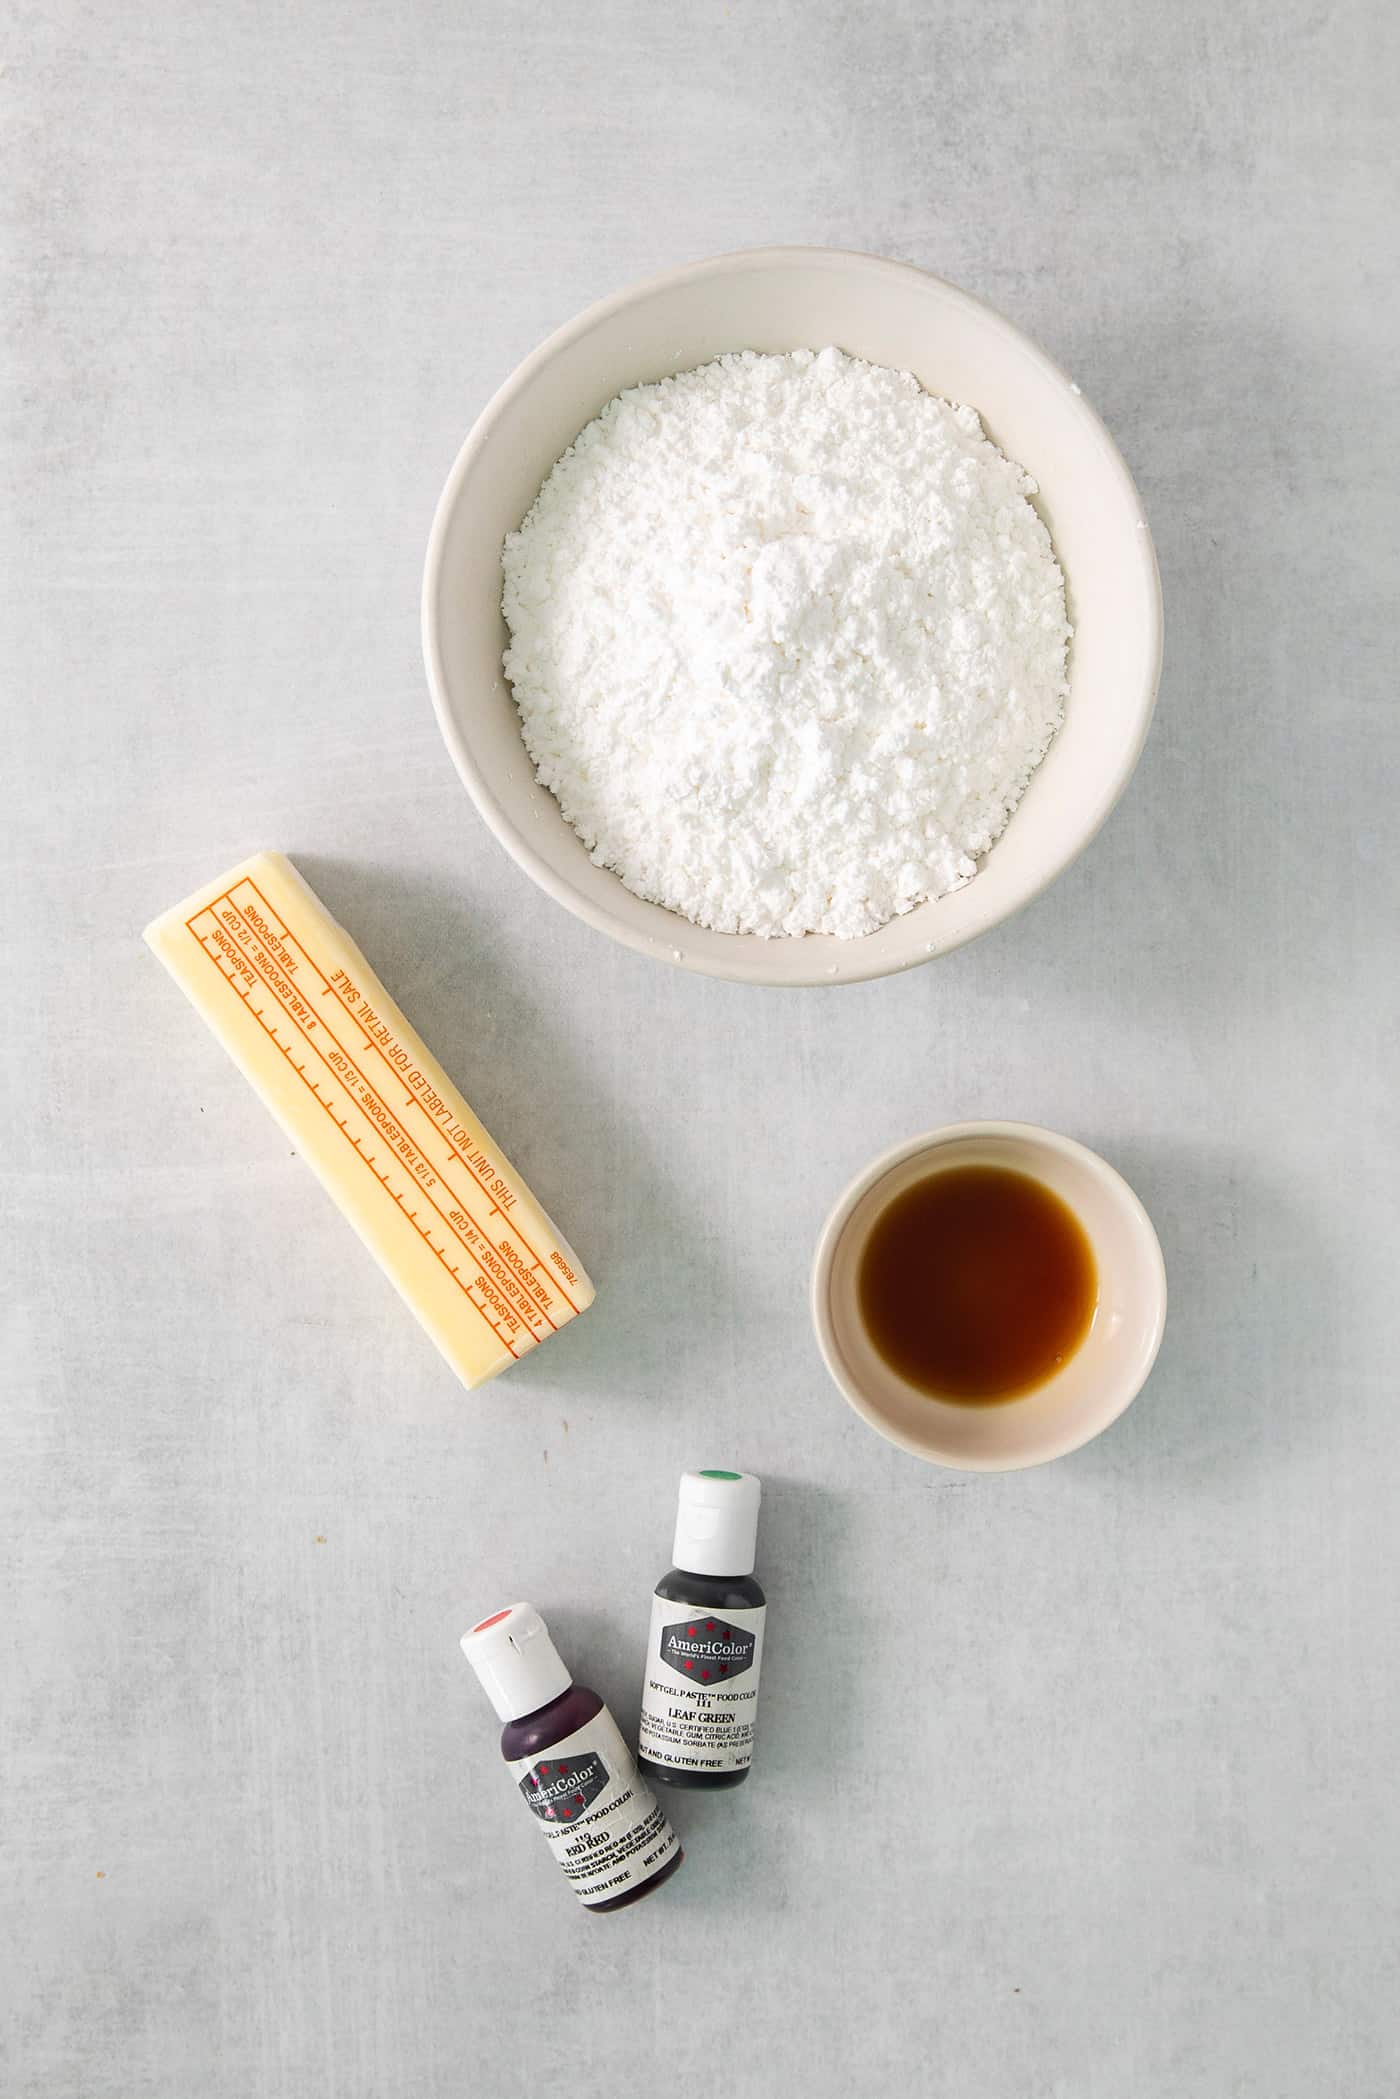 Ingredients for cream wafer cookie filling are shown on a white background: butter, powdered sugar, vanilla, and food coloring.